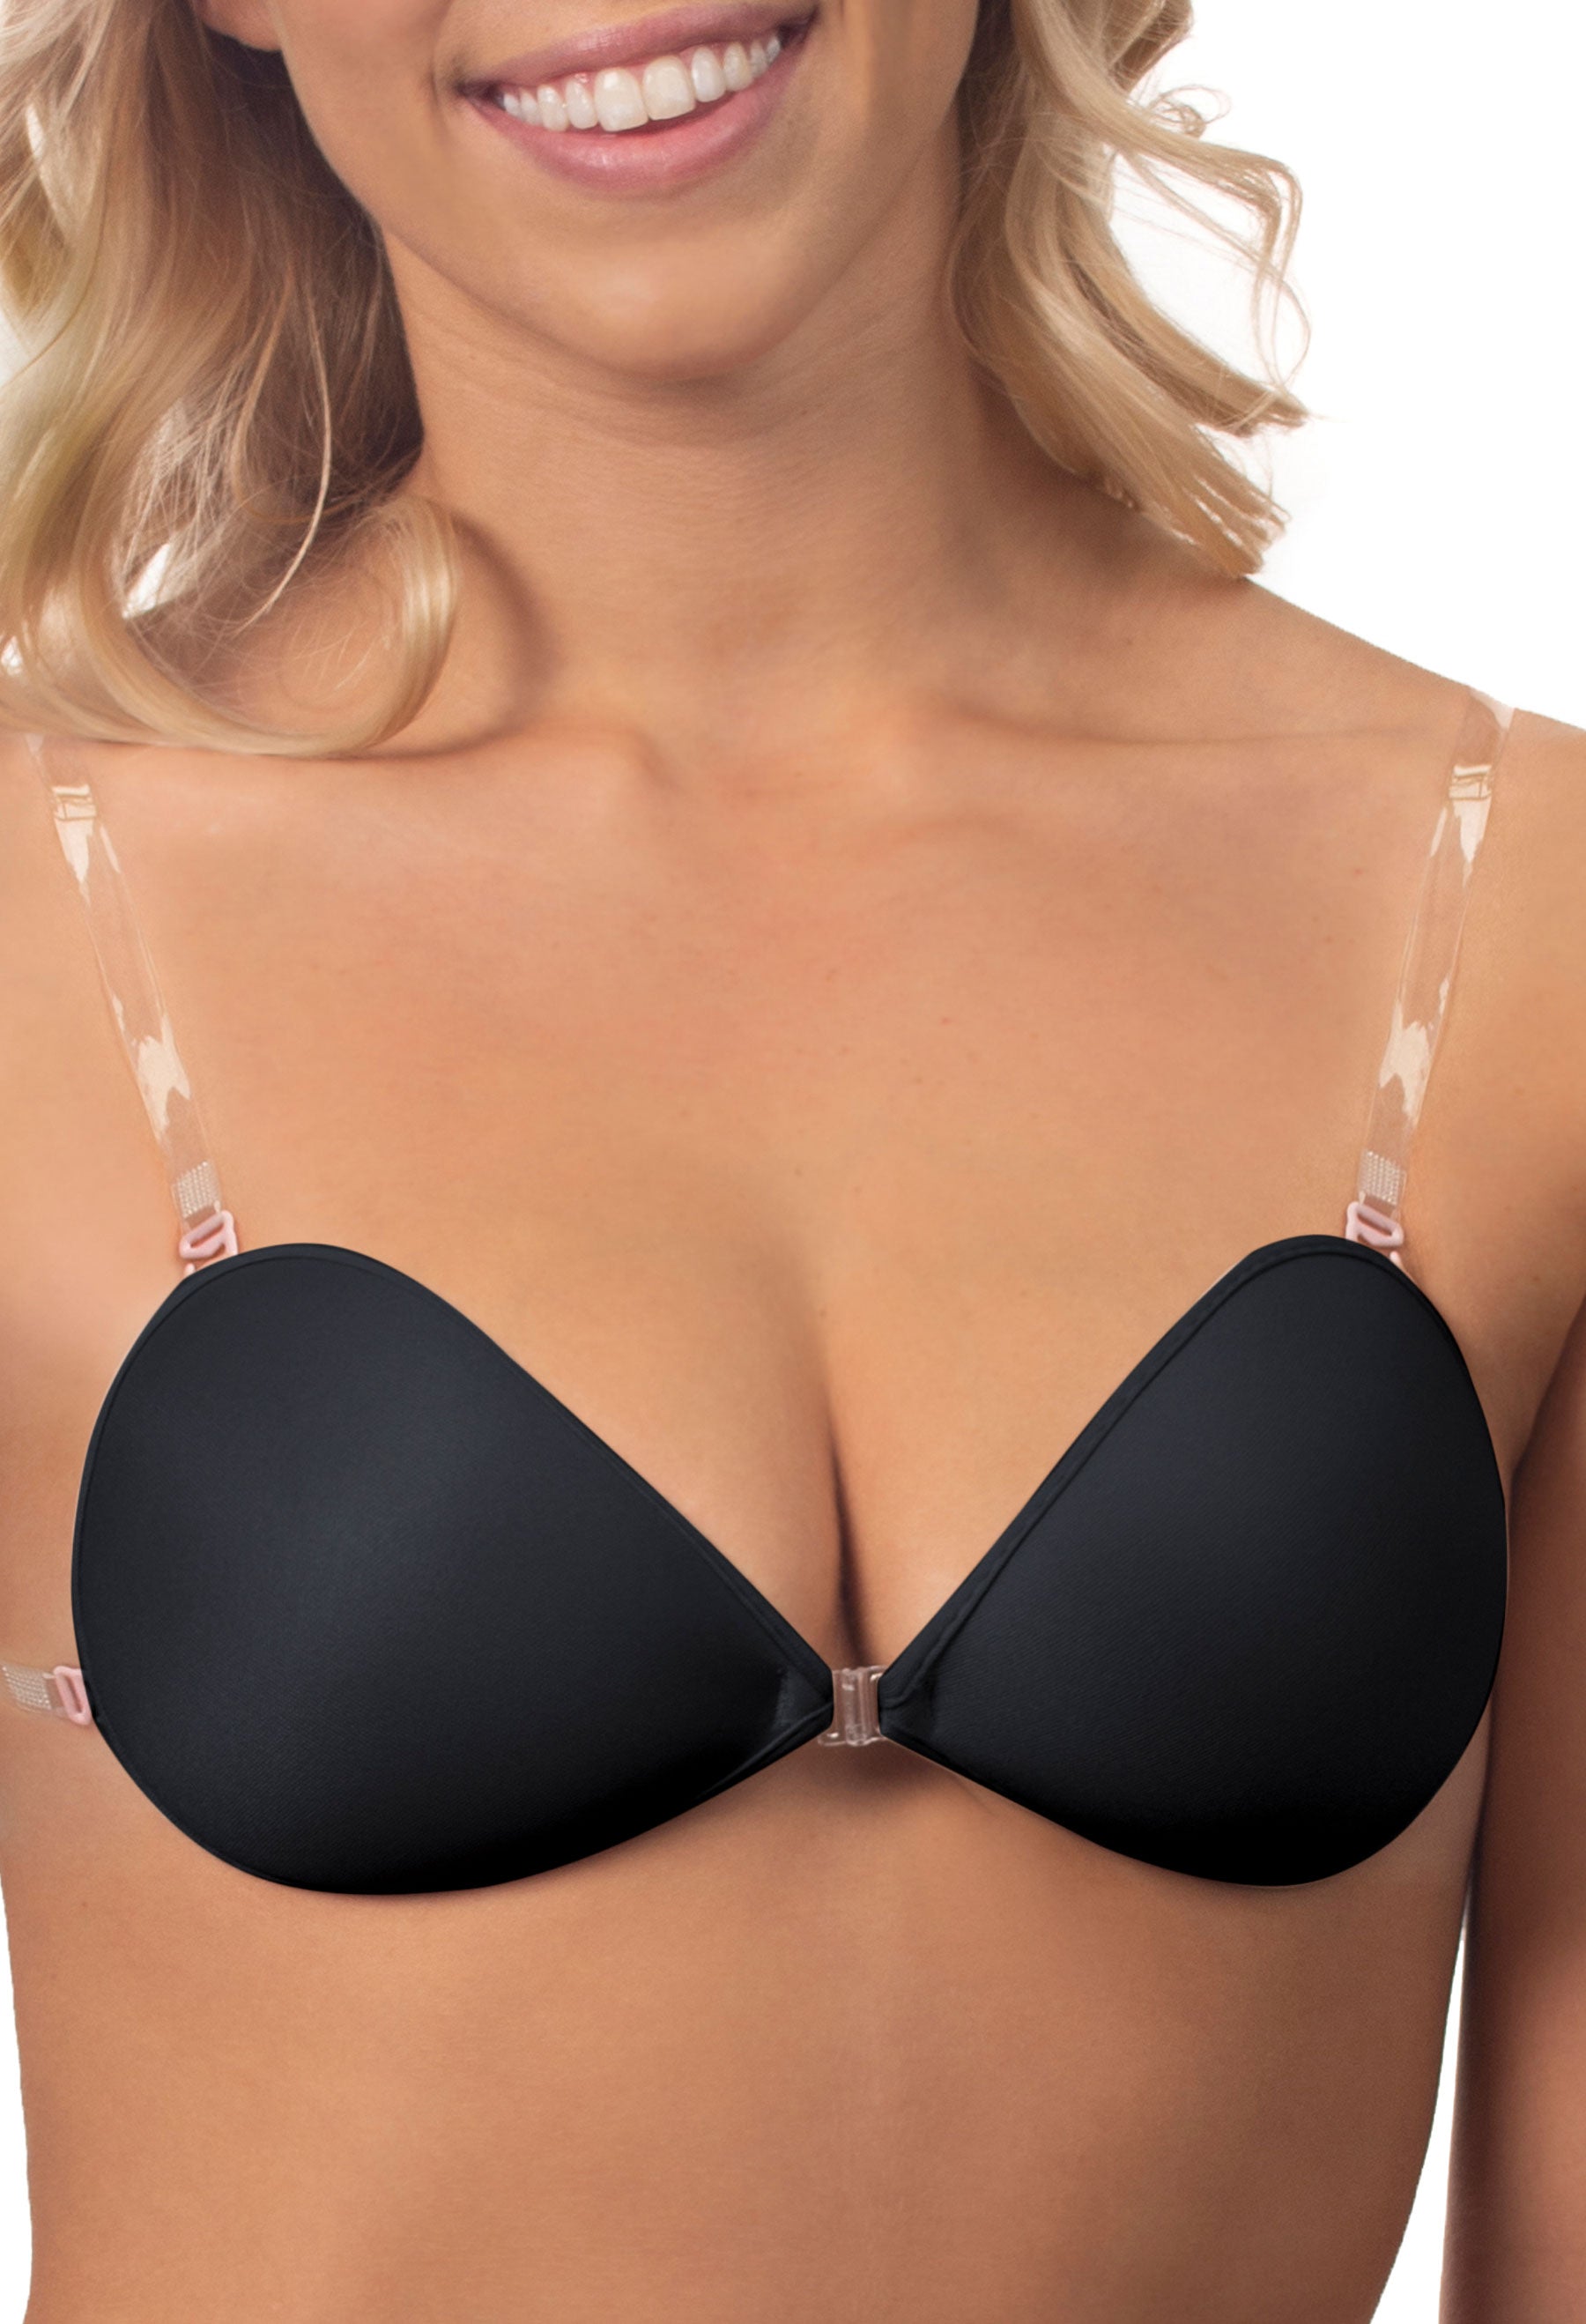 Wholesale clear silicone bra For Supportive Underwear 